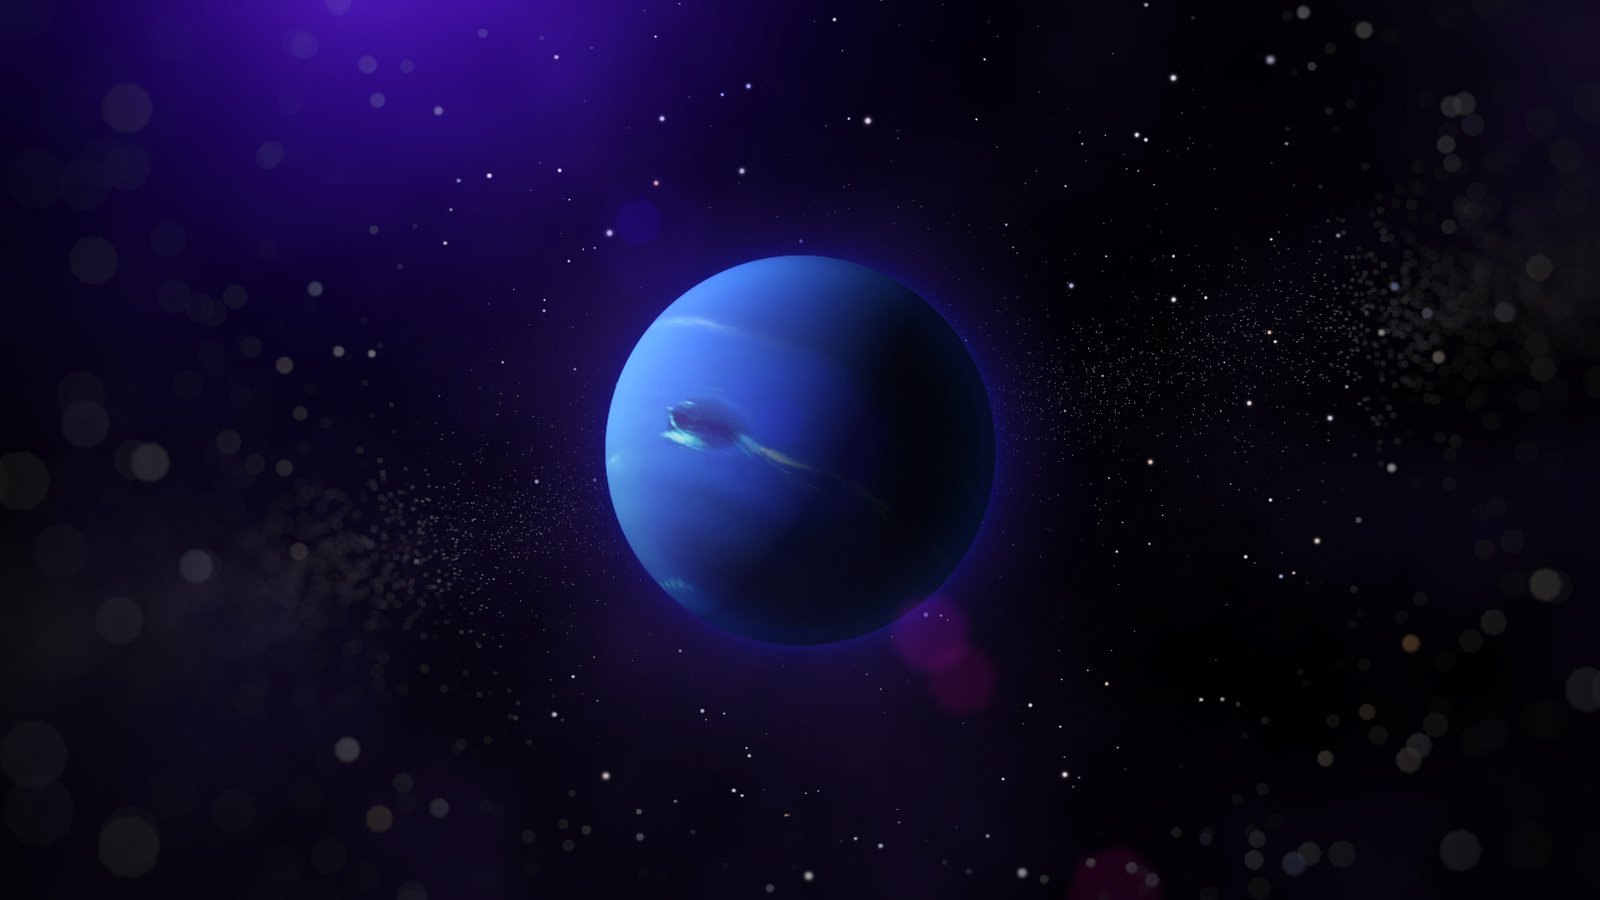 planets in space with stars and moon background